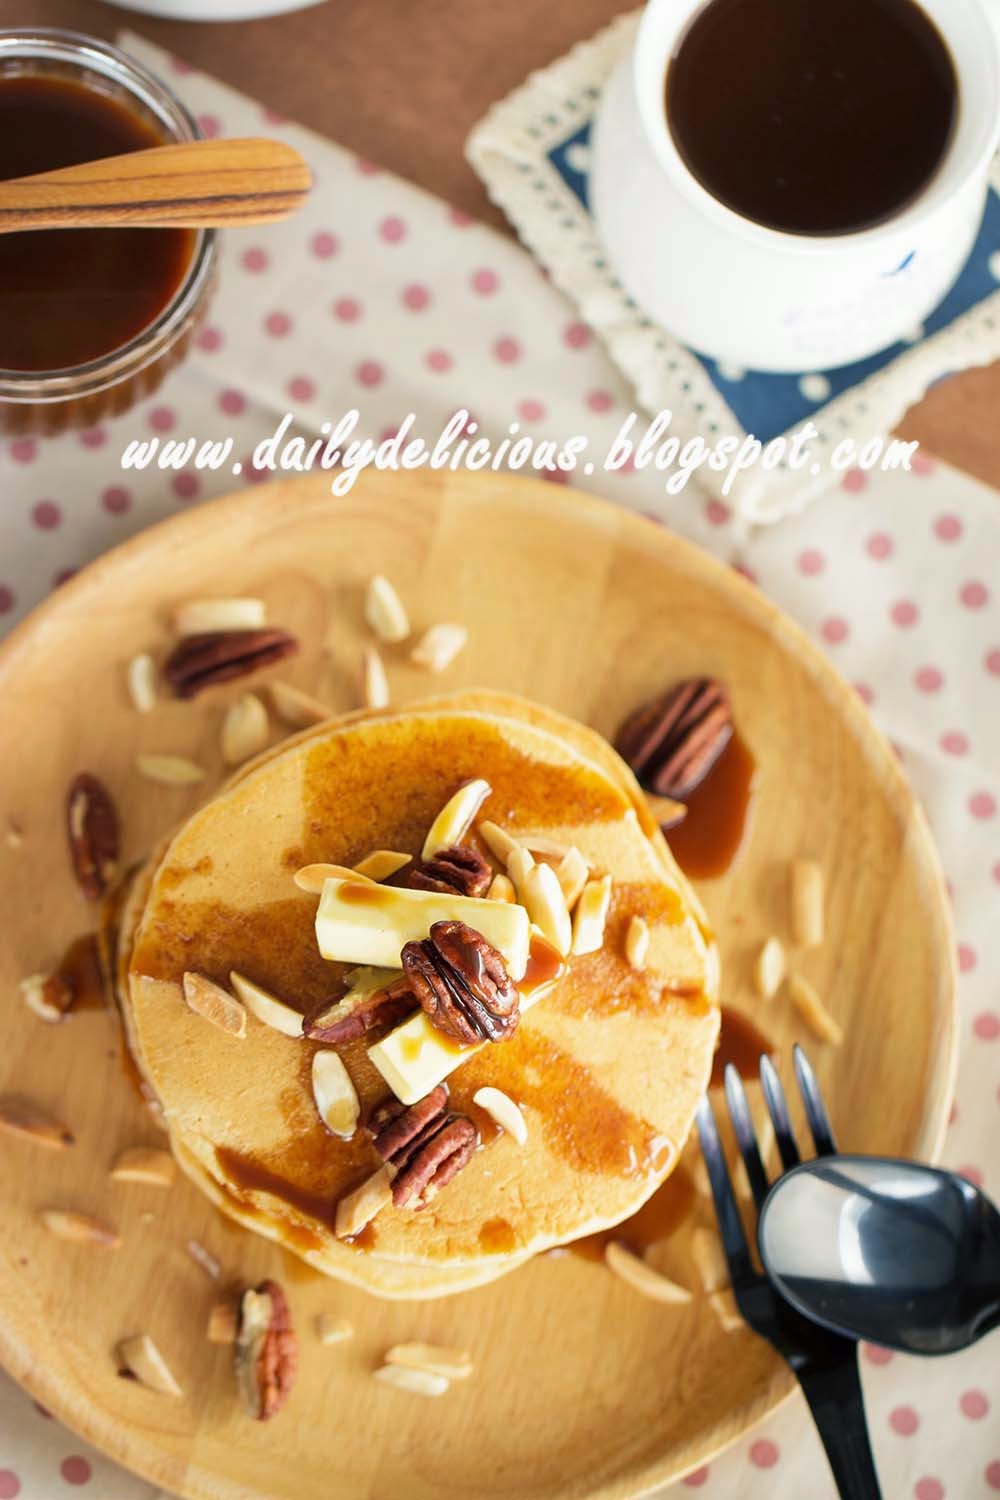 dailydelicious thai: Thick brown sugar pancake with Butterscotch toffee ...